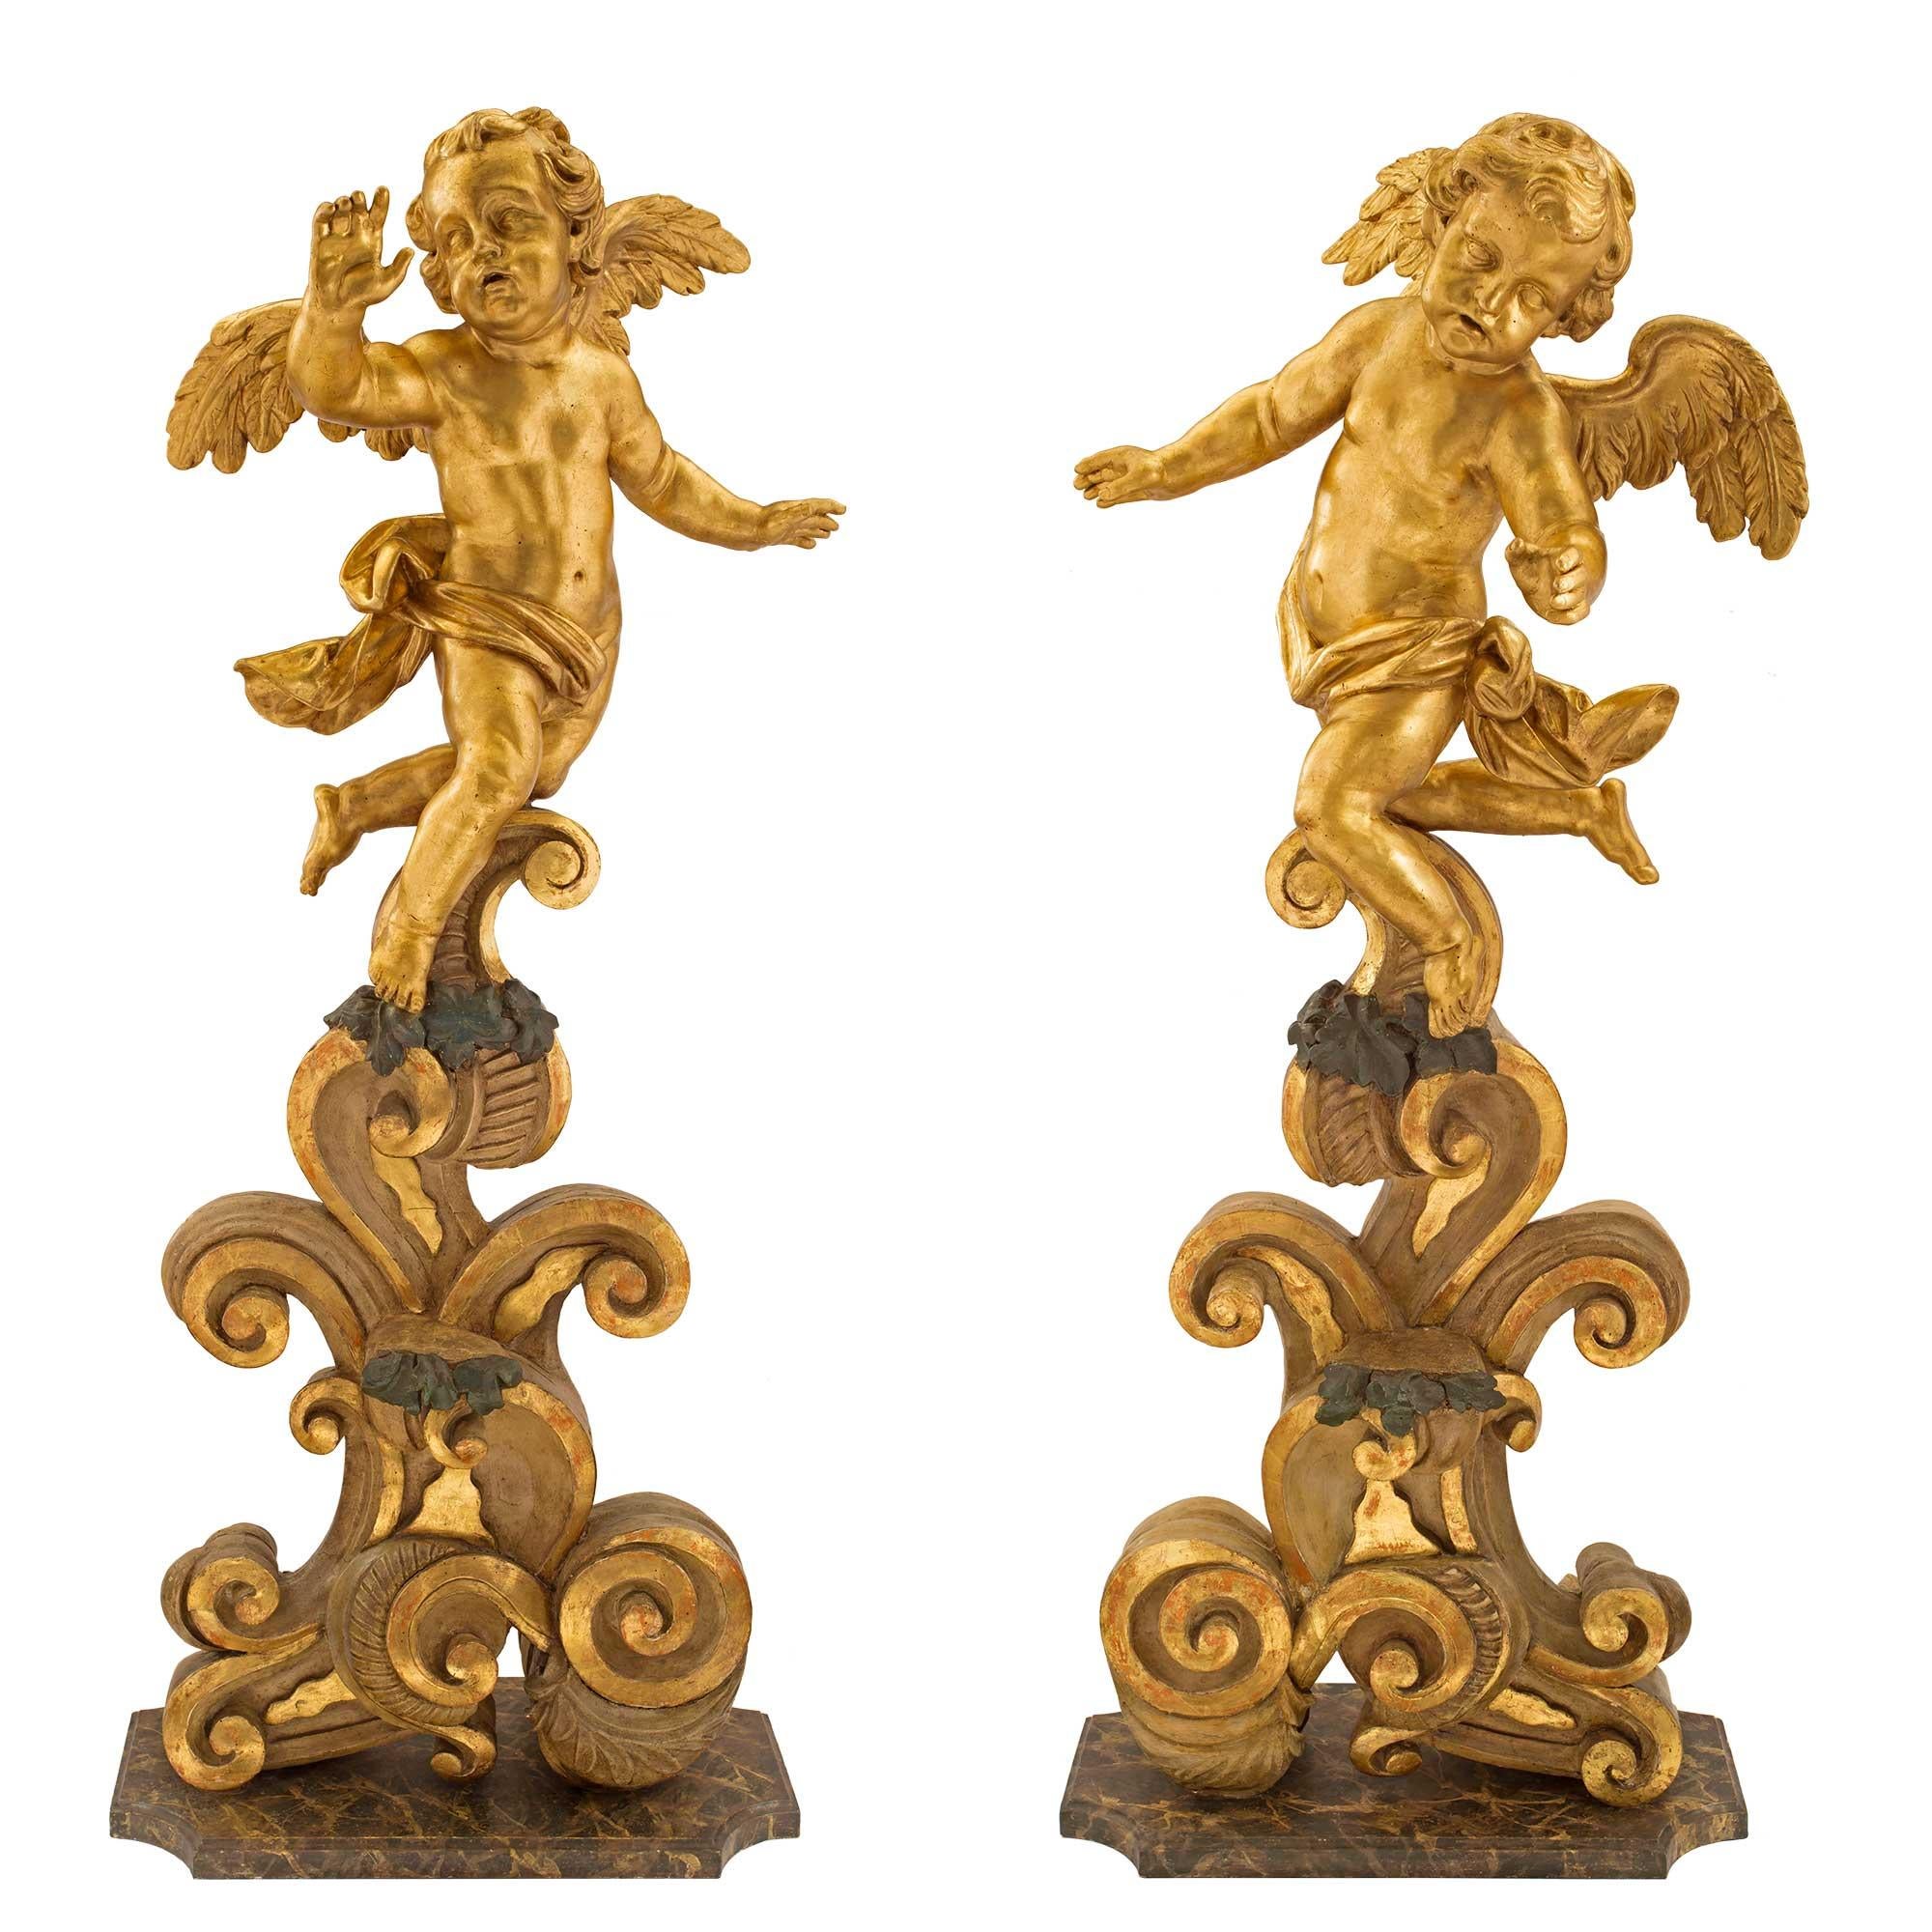 A sensational and extremely decorative true pair of Italian 18th century Baroque giltwood, polychrome and faux painted marble cherub statues. Each impressive and large scale statue is raised by a beautiful rectangular base with concave corners and a